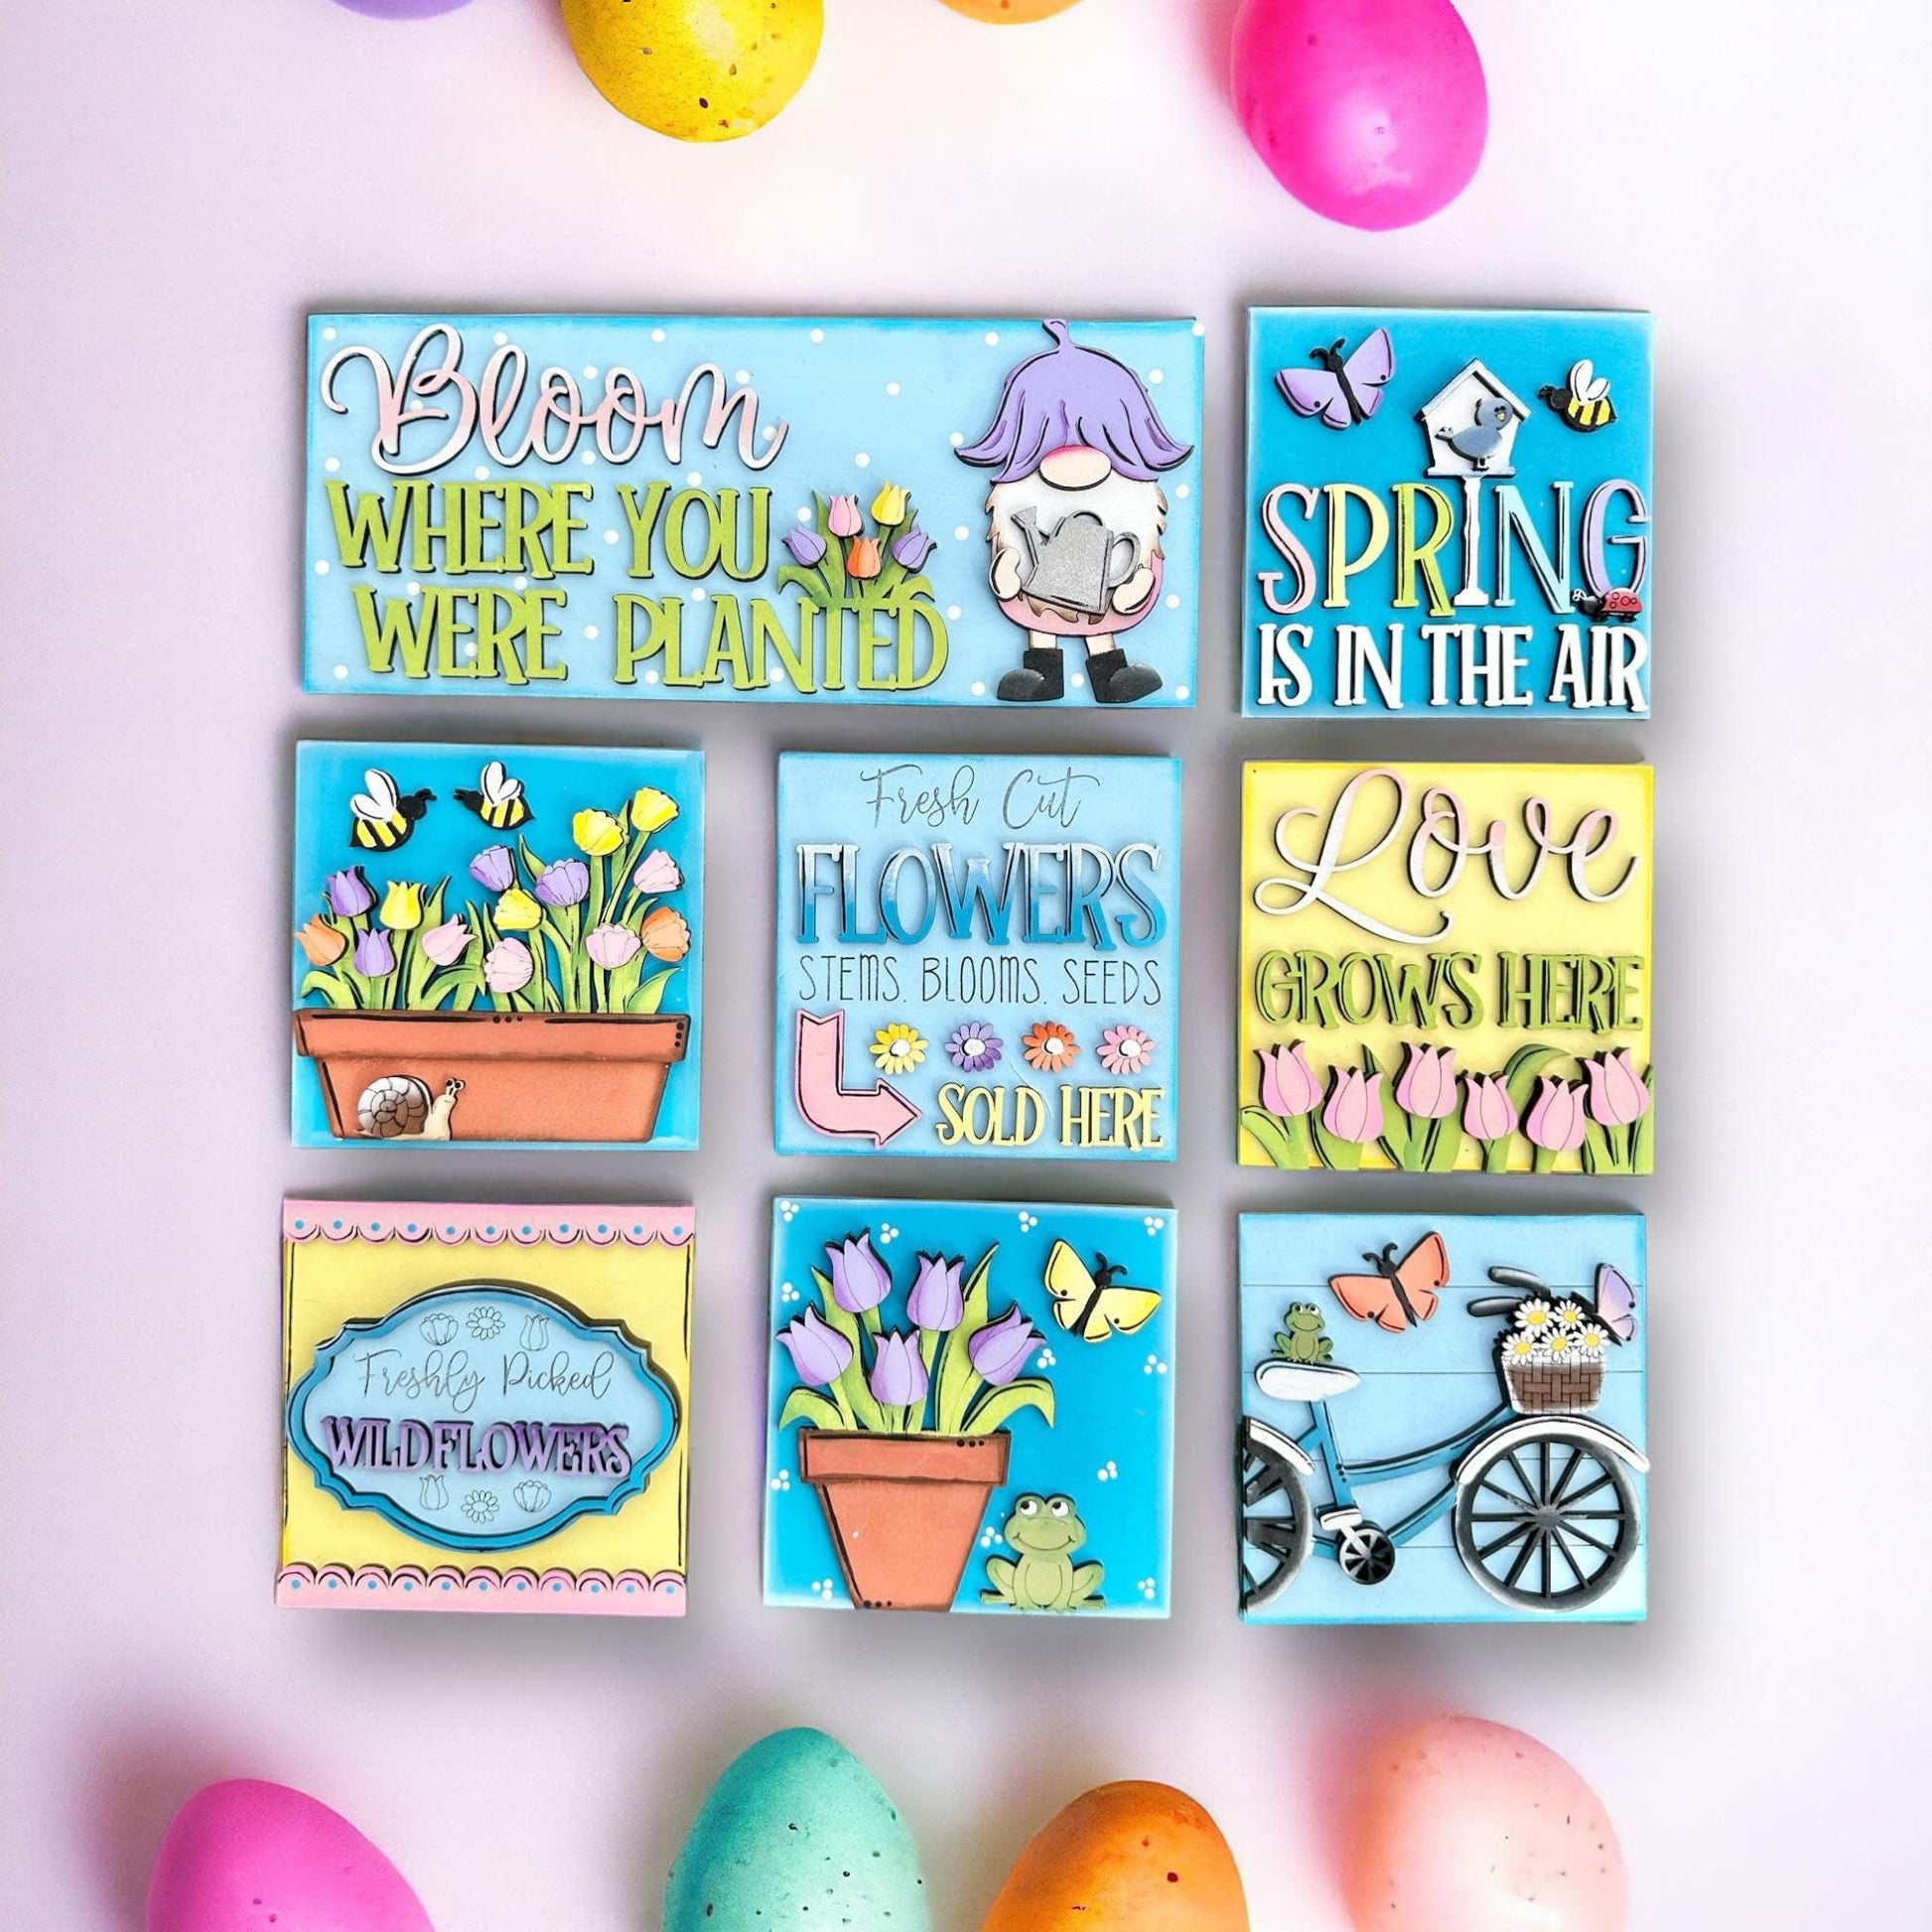 Spring Gnome Tiles For The Leaning Ladder - RusticFarmhouseDecor